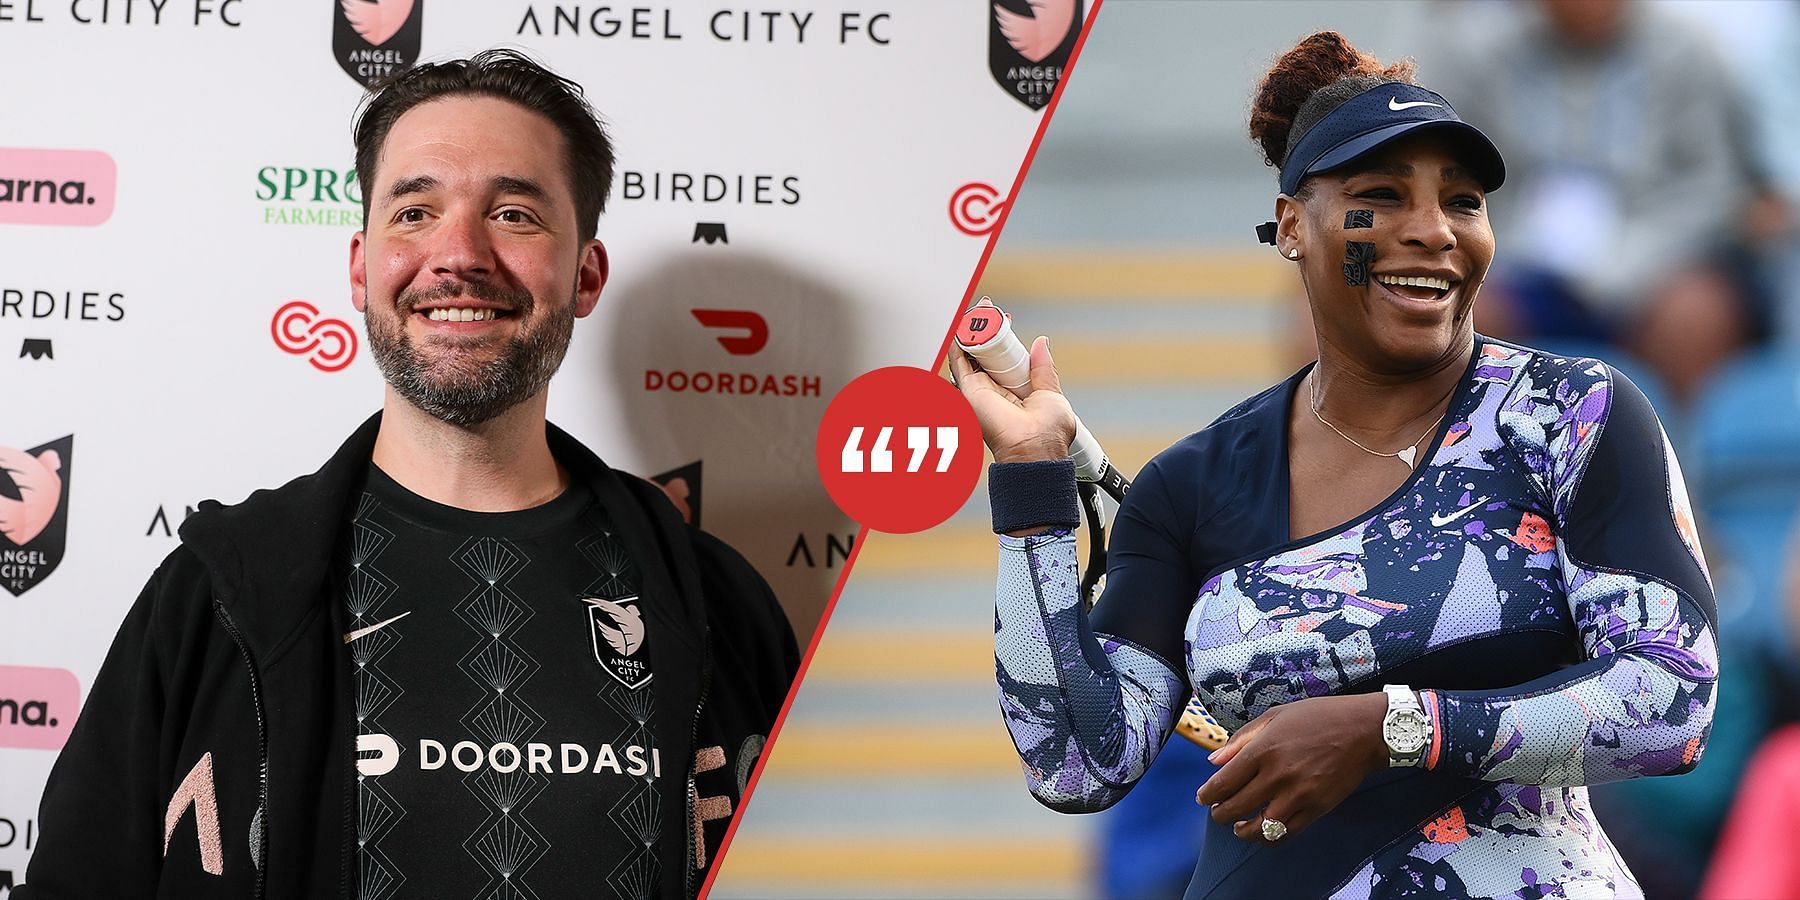 Alexis Ohanian [left] revealed that the best piece of advice he has received has come from his wife, Serena Williams